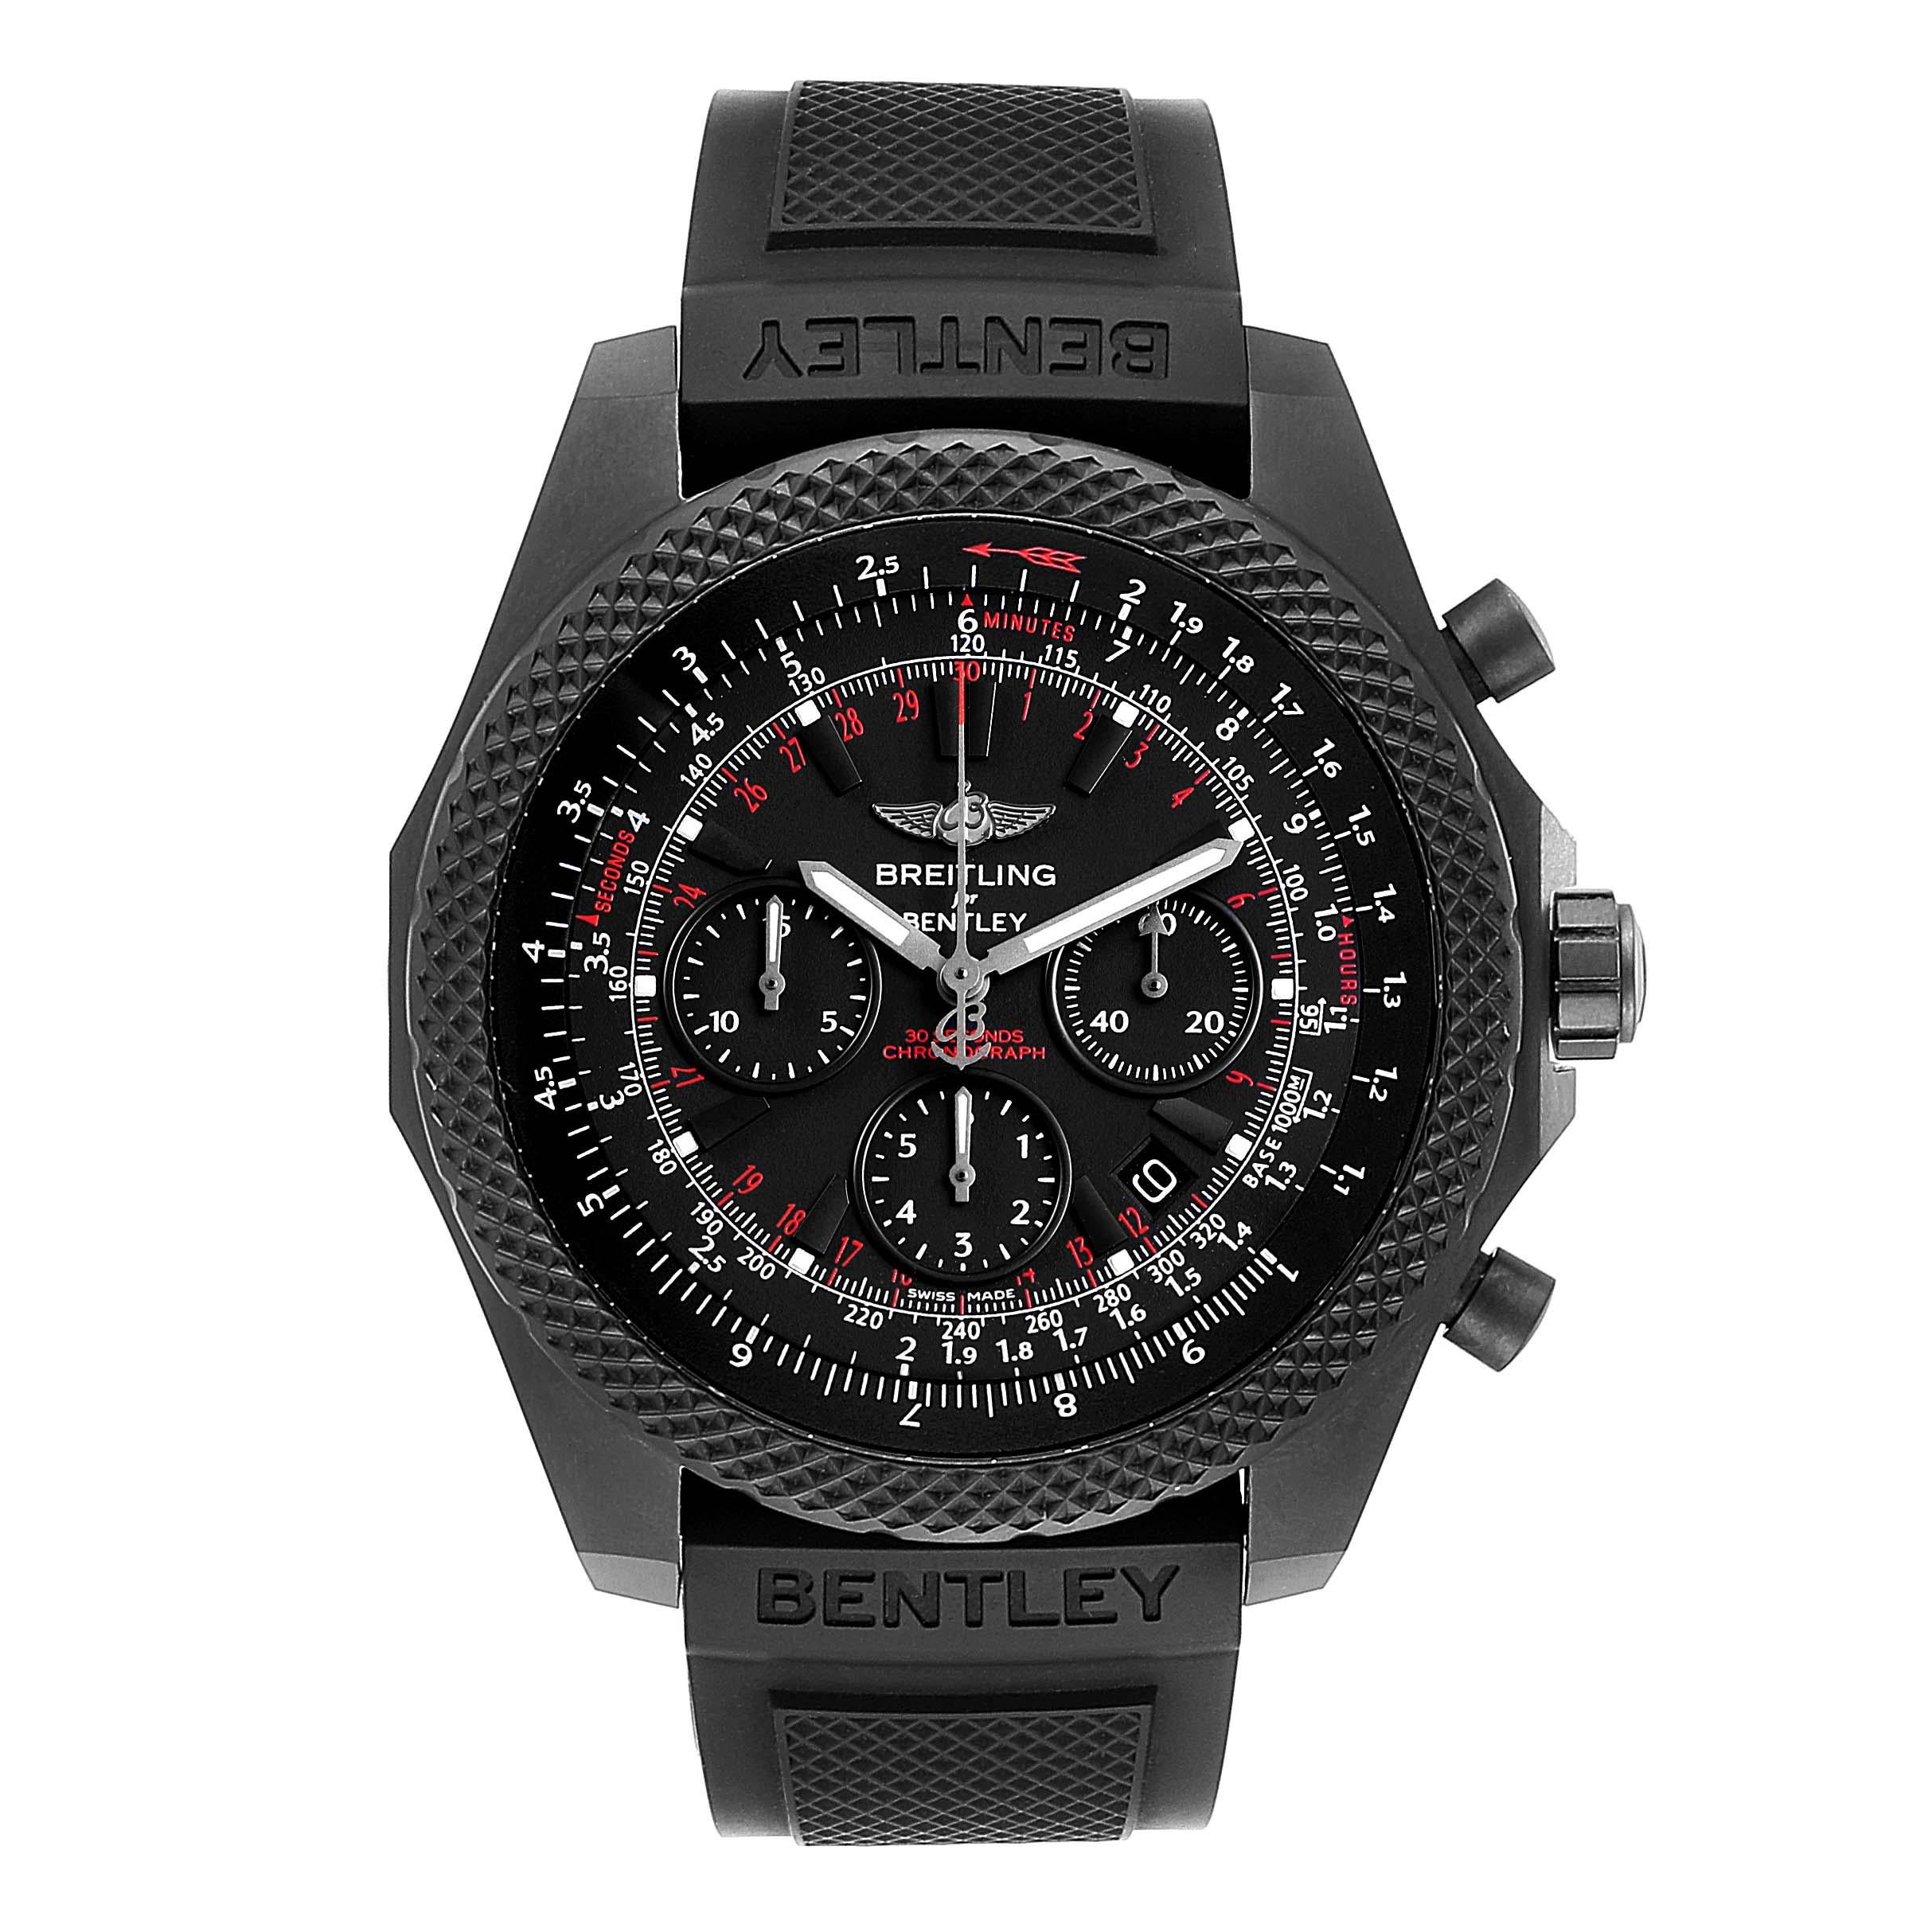 Breitling Bentley Light Body Midnight Carbon Ruber Strap LE Watch V25367. Automatic self-winding officially certified chronometer movement. Chronograph function. Black PVD coated titanium case 49.0 mm in diameter. Bidirectional rotating bezel.